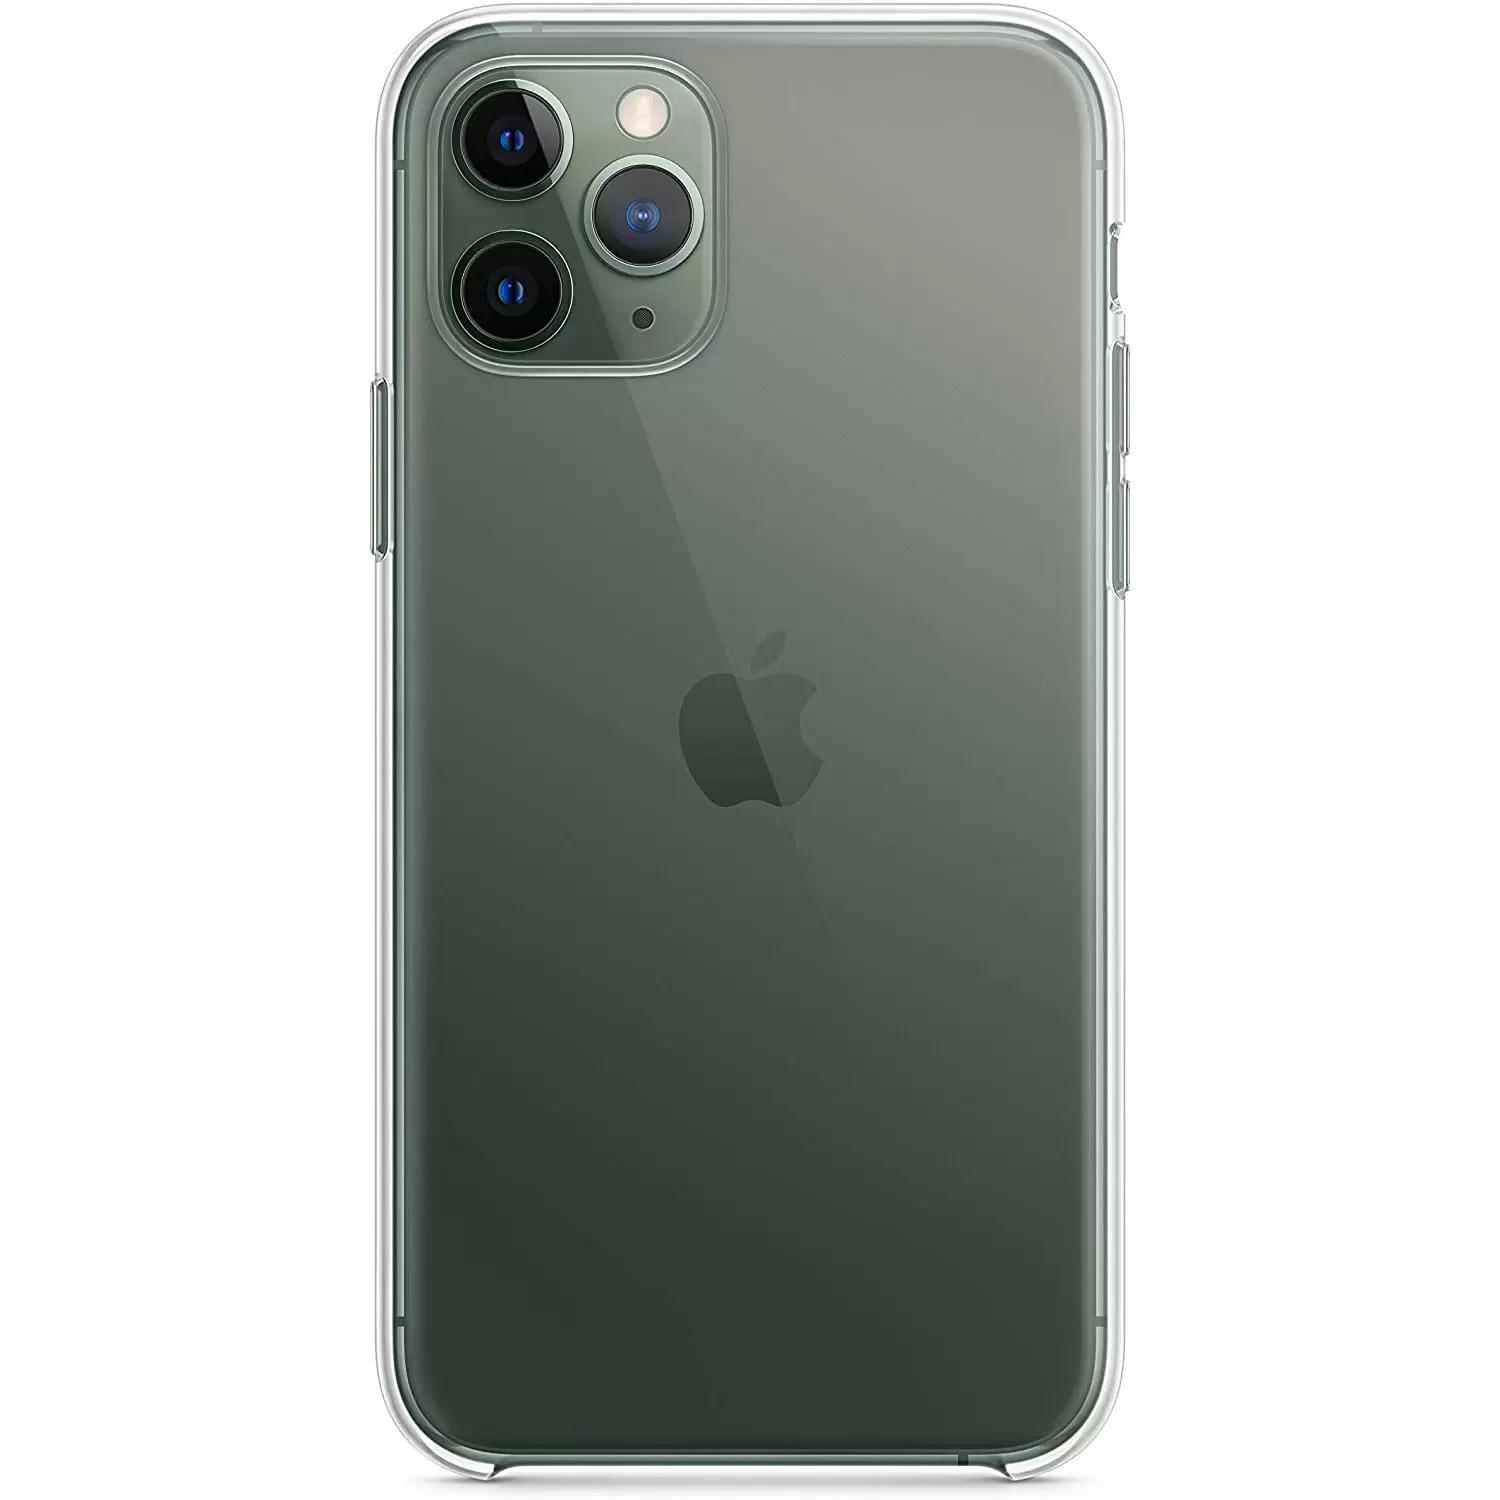 Apple iPhone 11 Pro Apple Made Cases for $11.99